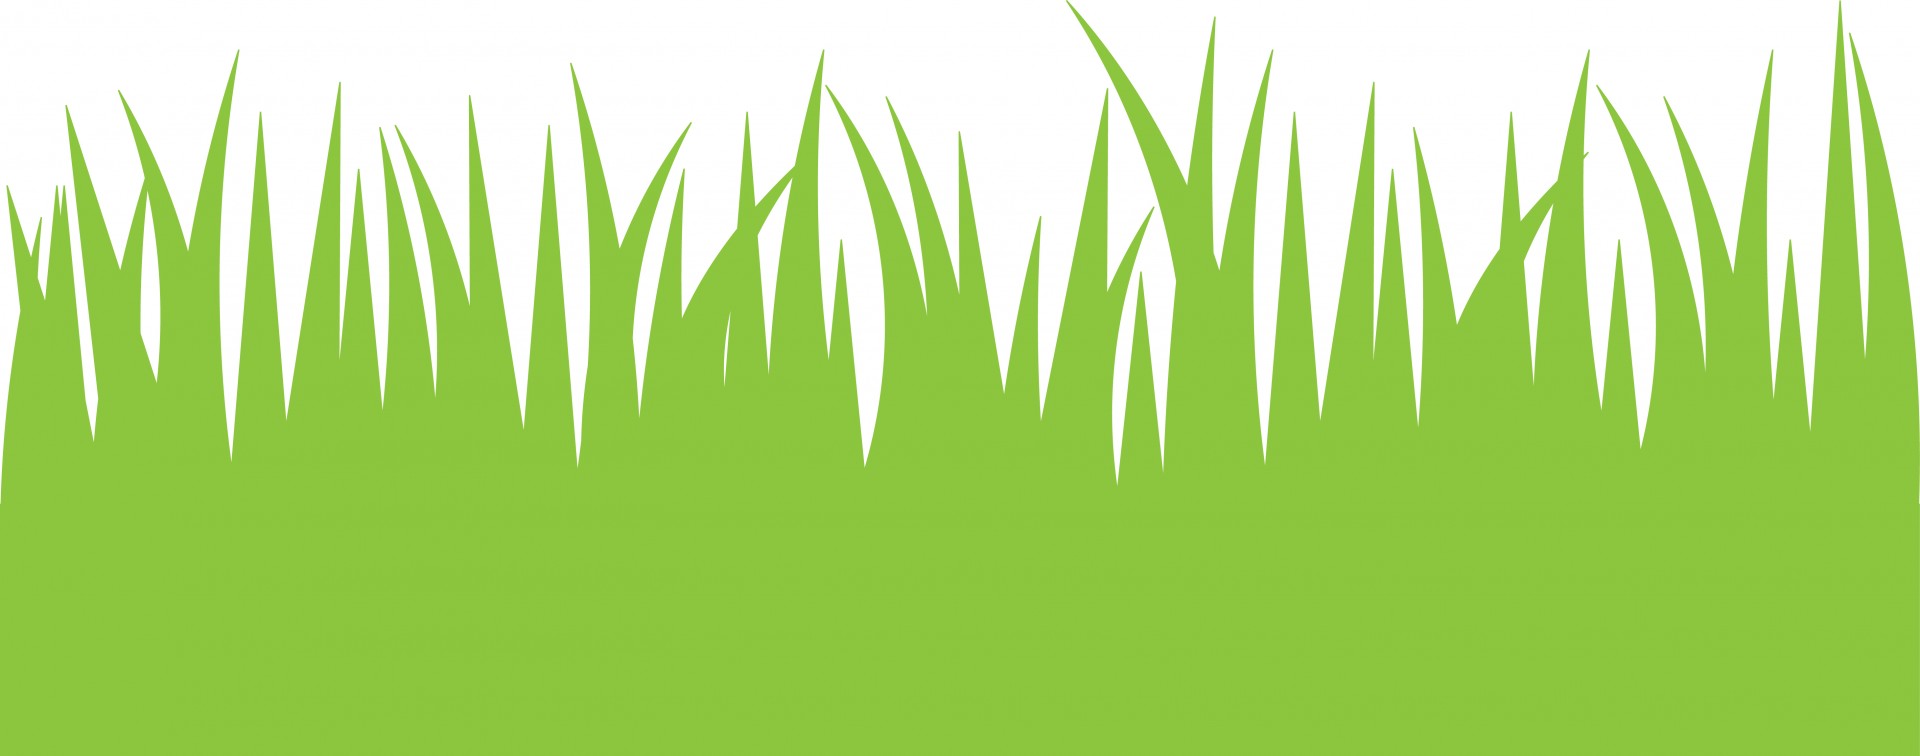 Free grass clip art pictures